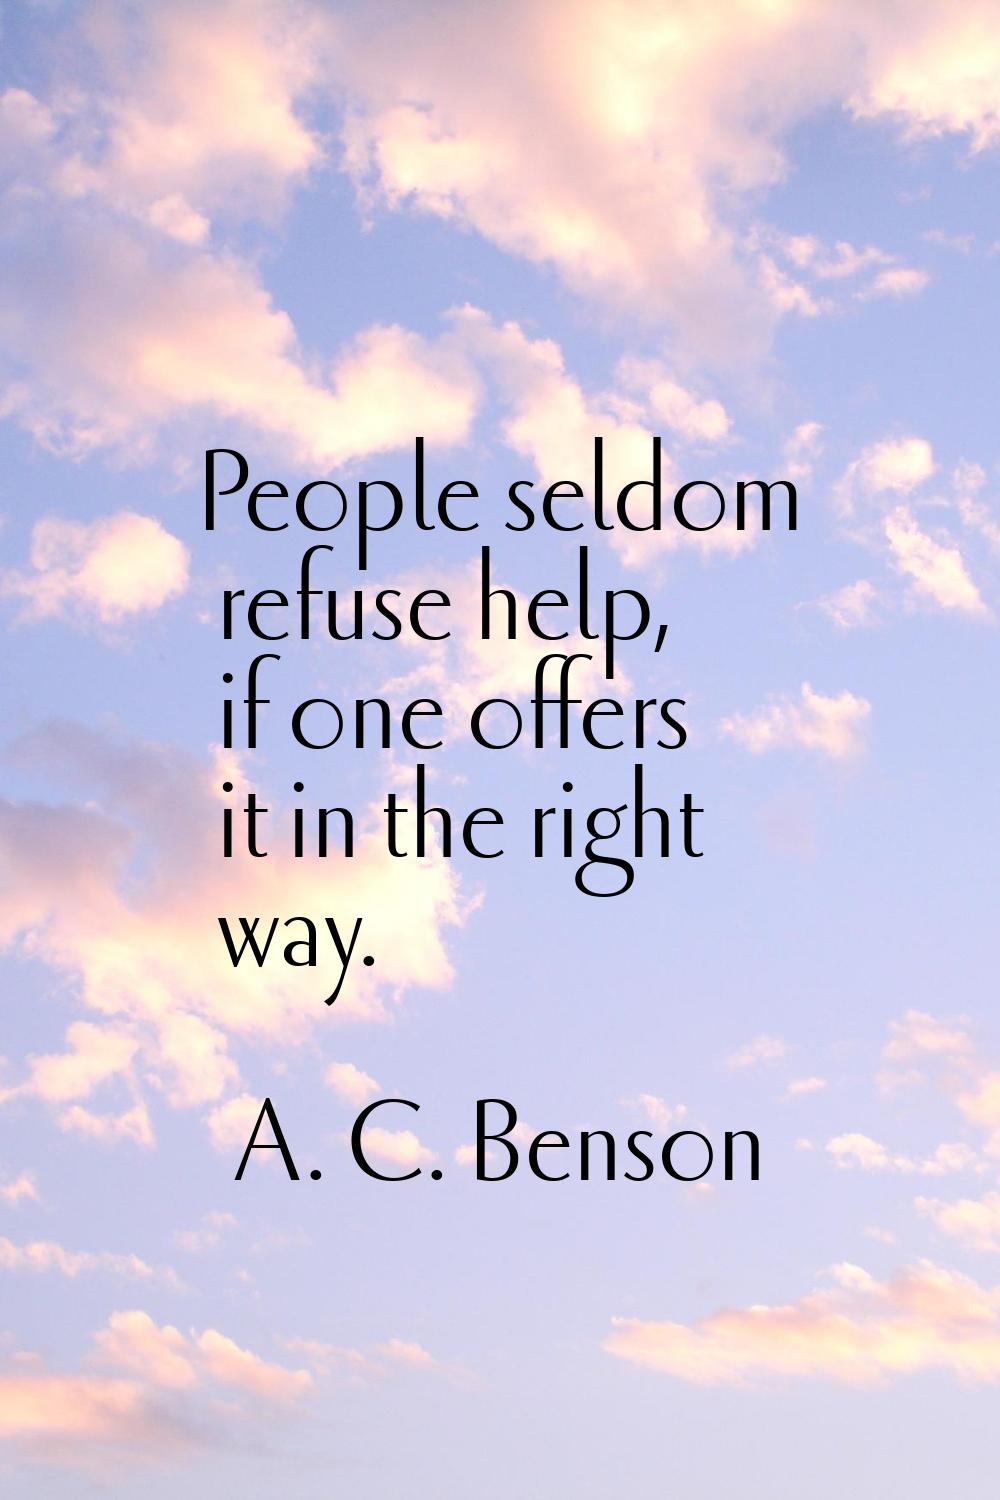 People seldom refuse help, if one offers it in the right way.